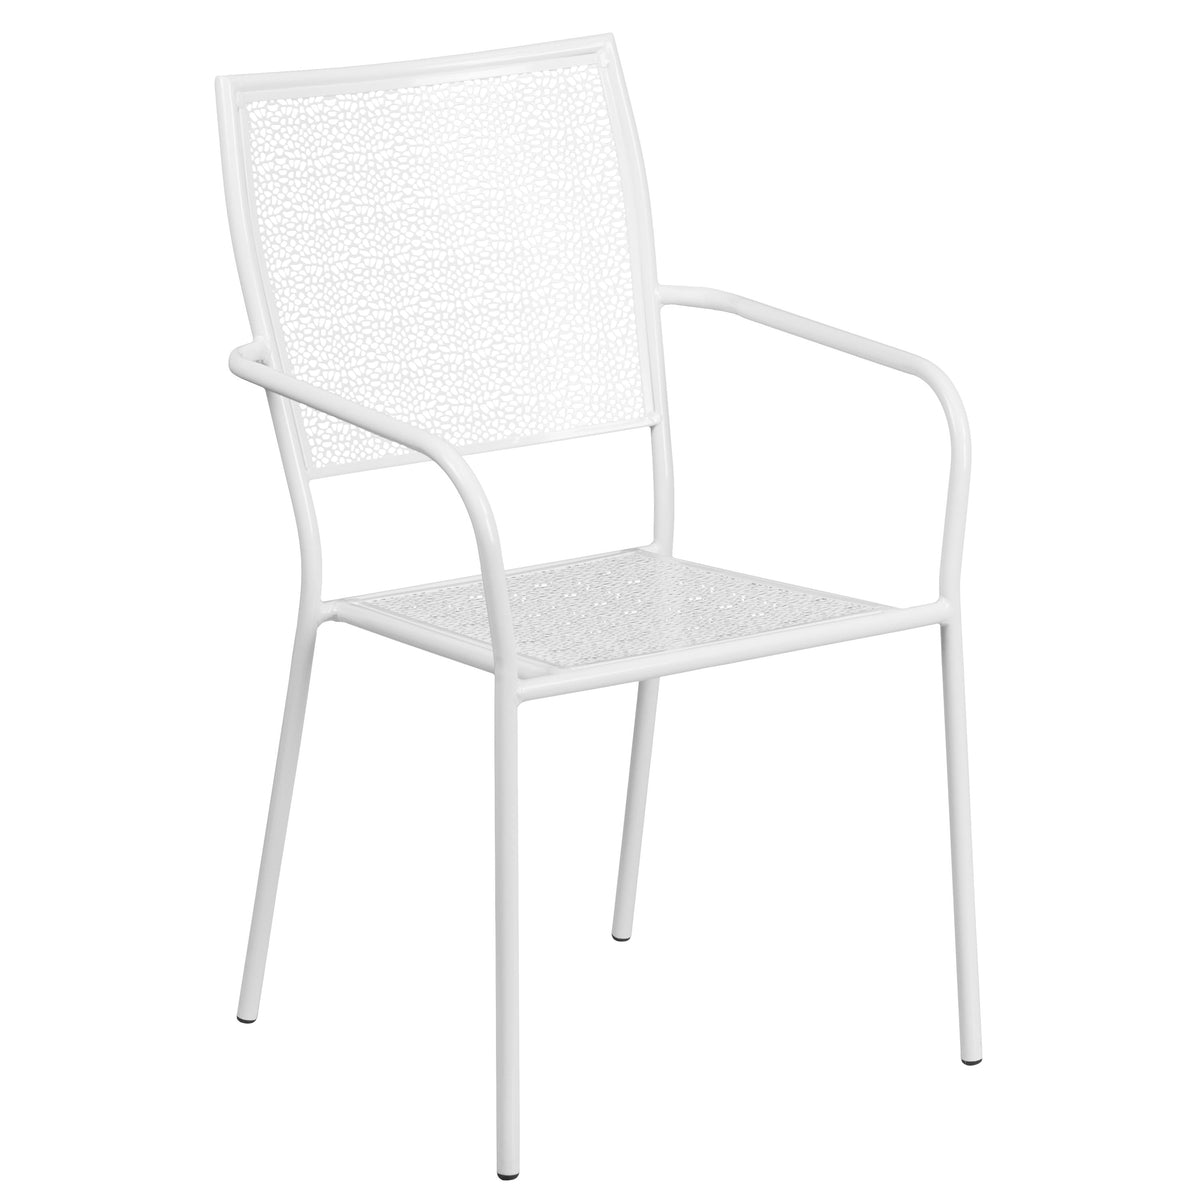 White |#| 35.25inch Round White Indoor-Outdoor Steel Patio Table Set w/ 2 Square Back Chairs